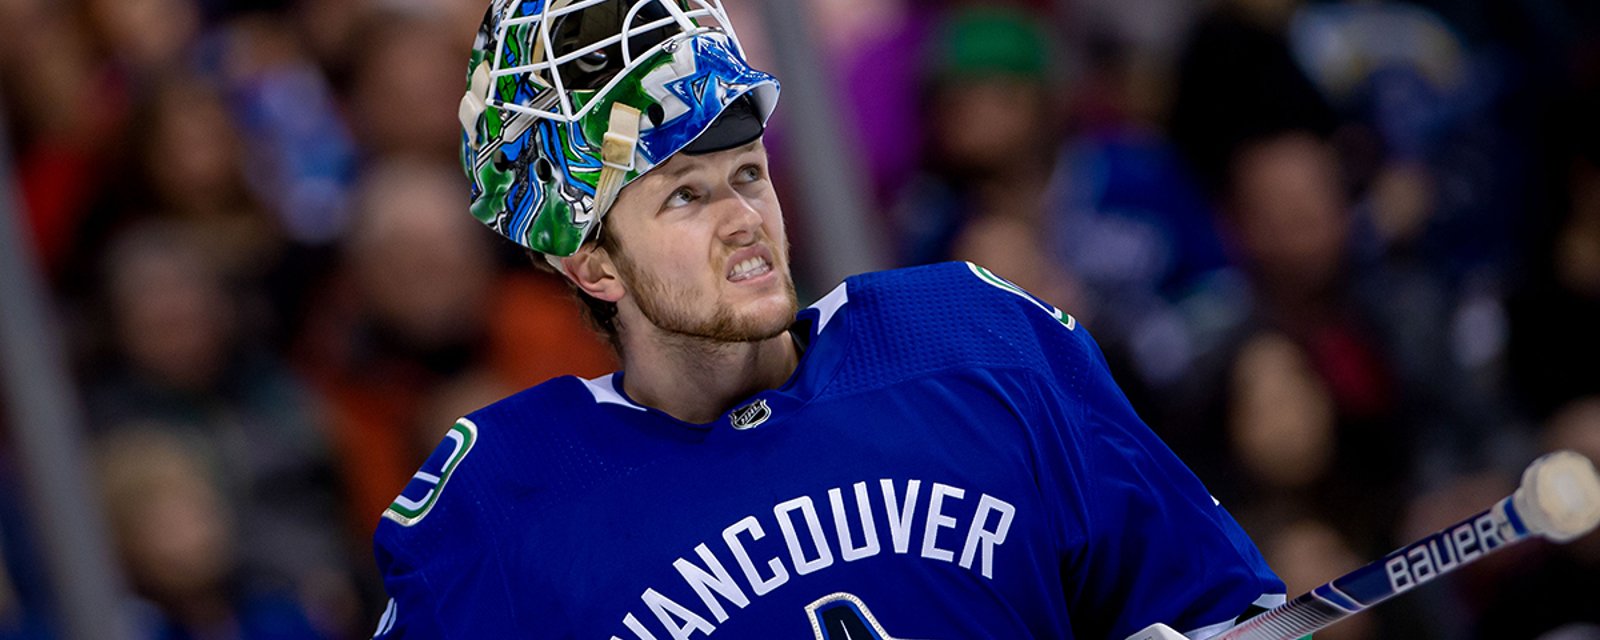 Breaking: Canucks get awful news for rookie goalie Demko